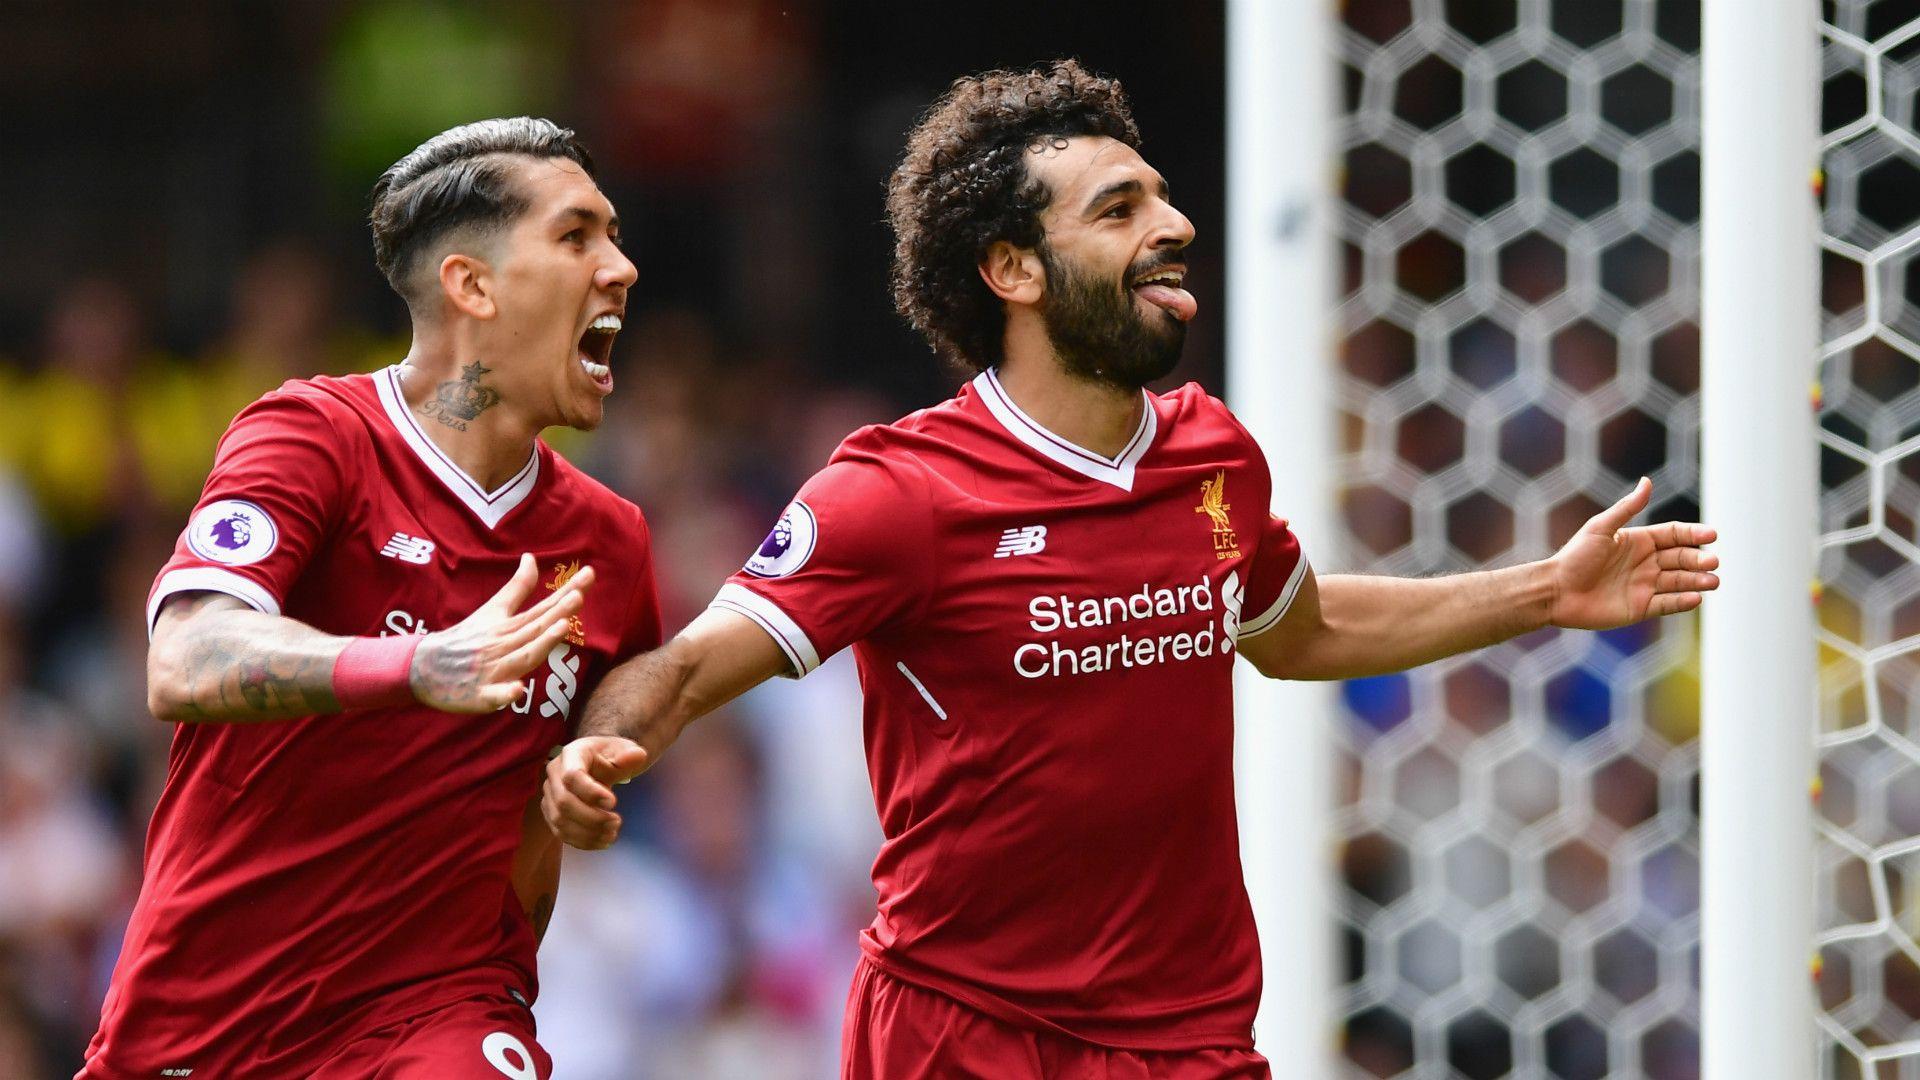 Premier League Team of the Week: Mohamed Salah and Roberto Firmino